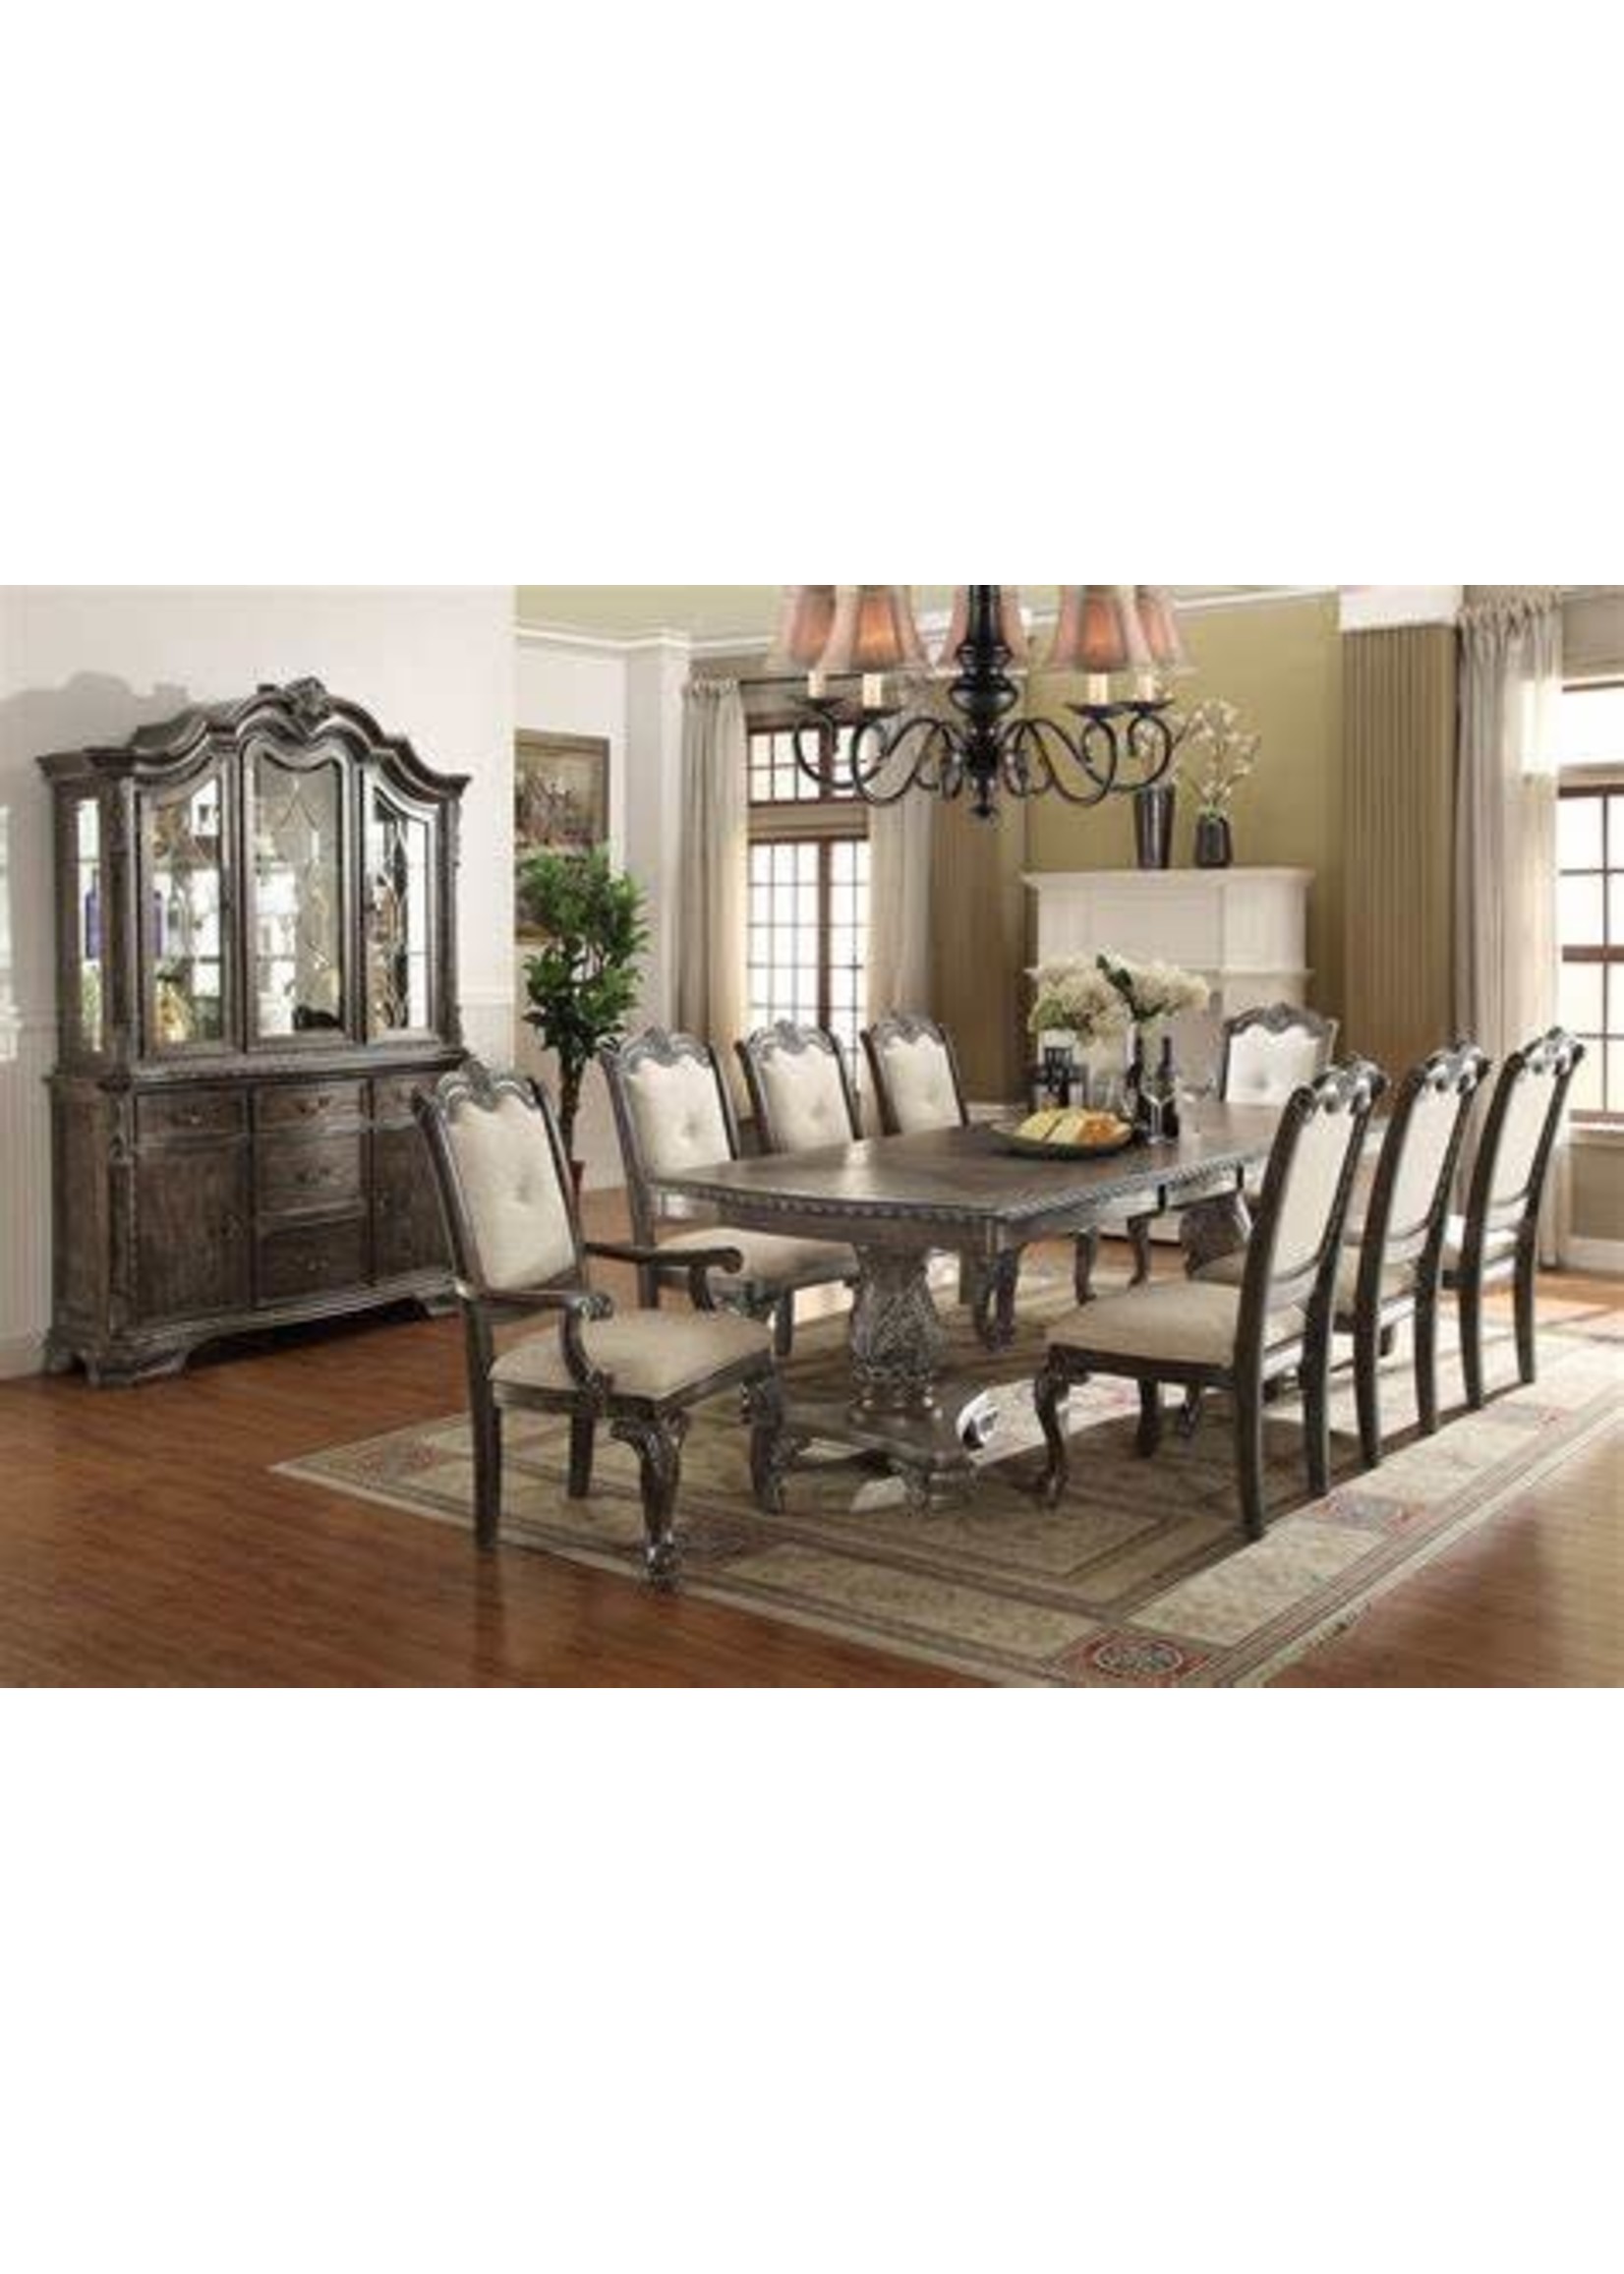 CROWNMARK SETD2151 KIERA DINING GROUP 7 PC TBL &4 ARMLESS CHAIRS, 2 ARM CHAIRS